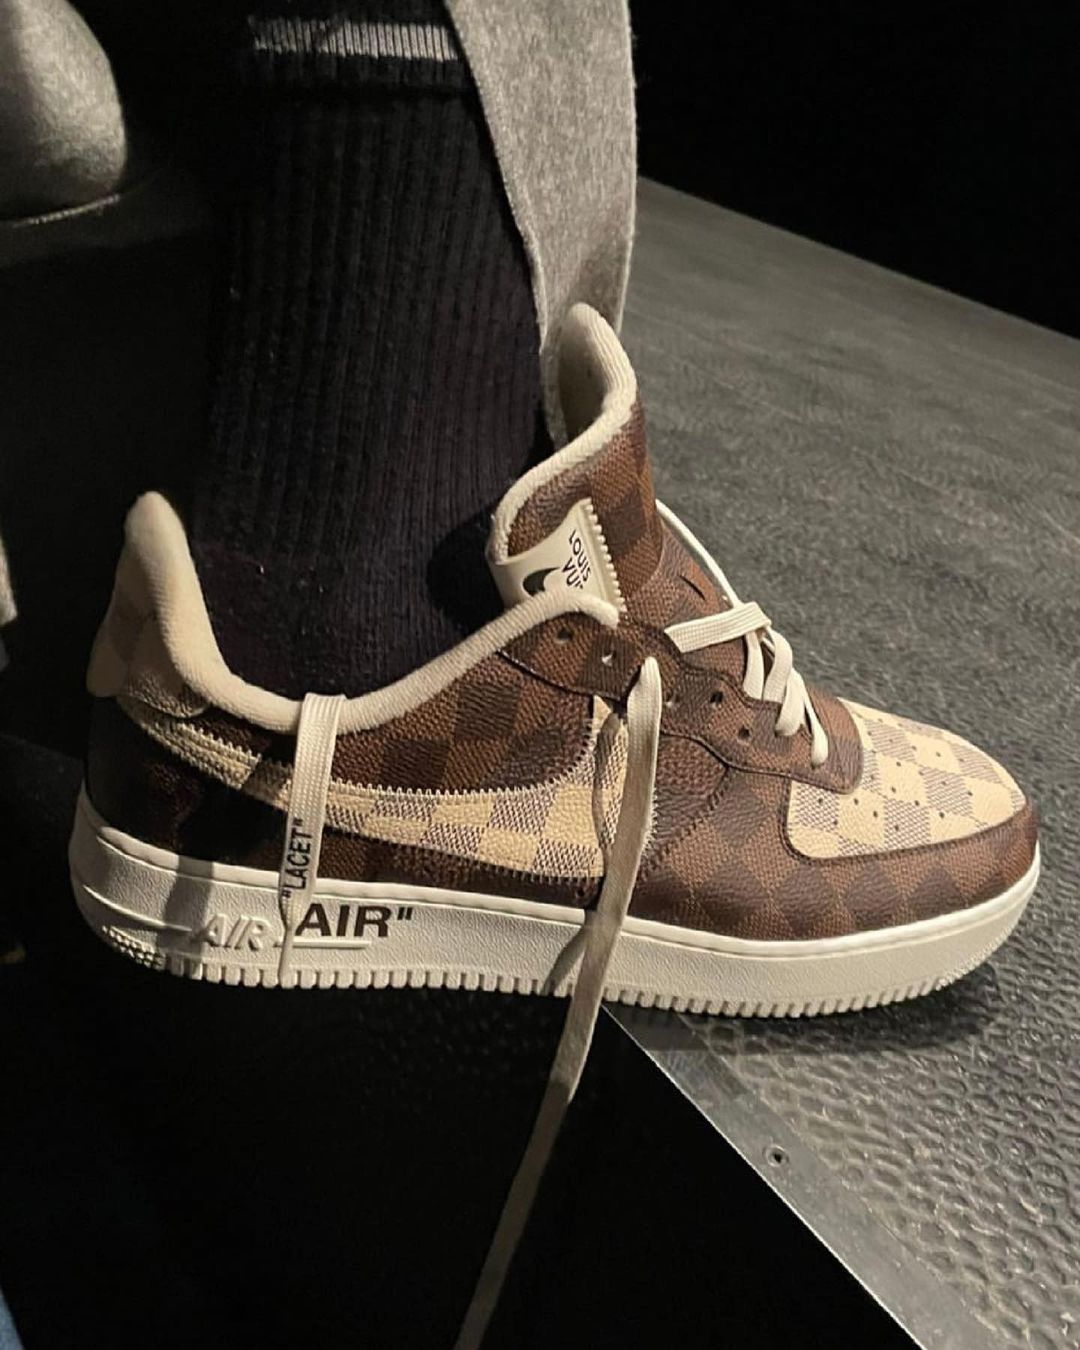 Louis Vuitton, Virgil Abloh, and Nike: The Expression of the “Air